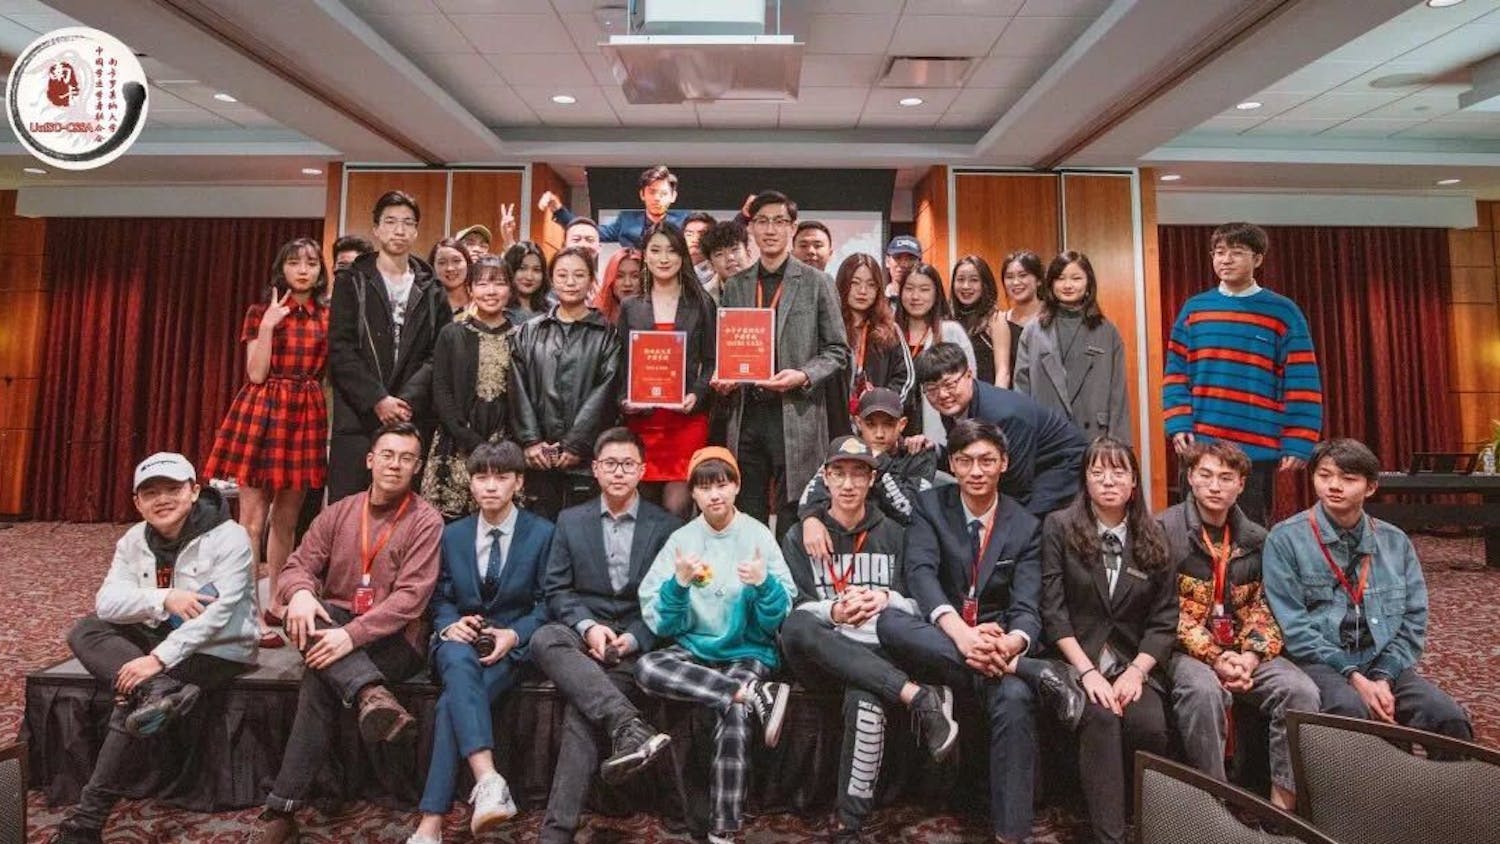 USC’s Chinese Students and Scholars Association (CSSA) posses for a group photo in 2020. The student organization promotes Chinese culture, as well as supports Chinese international students as they transition to life at USC.